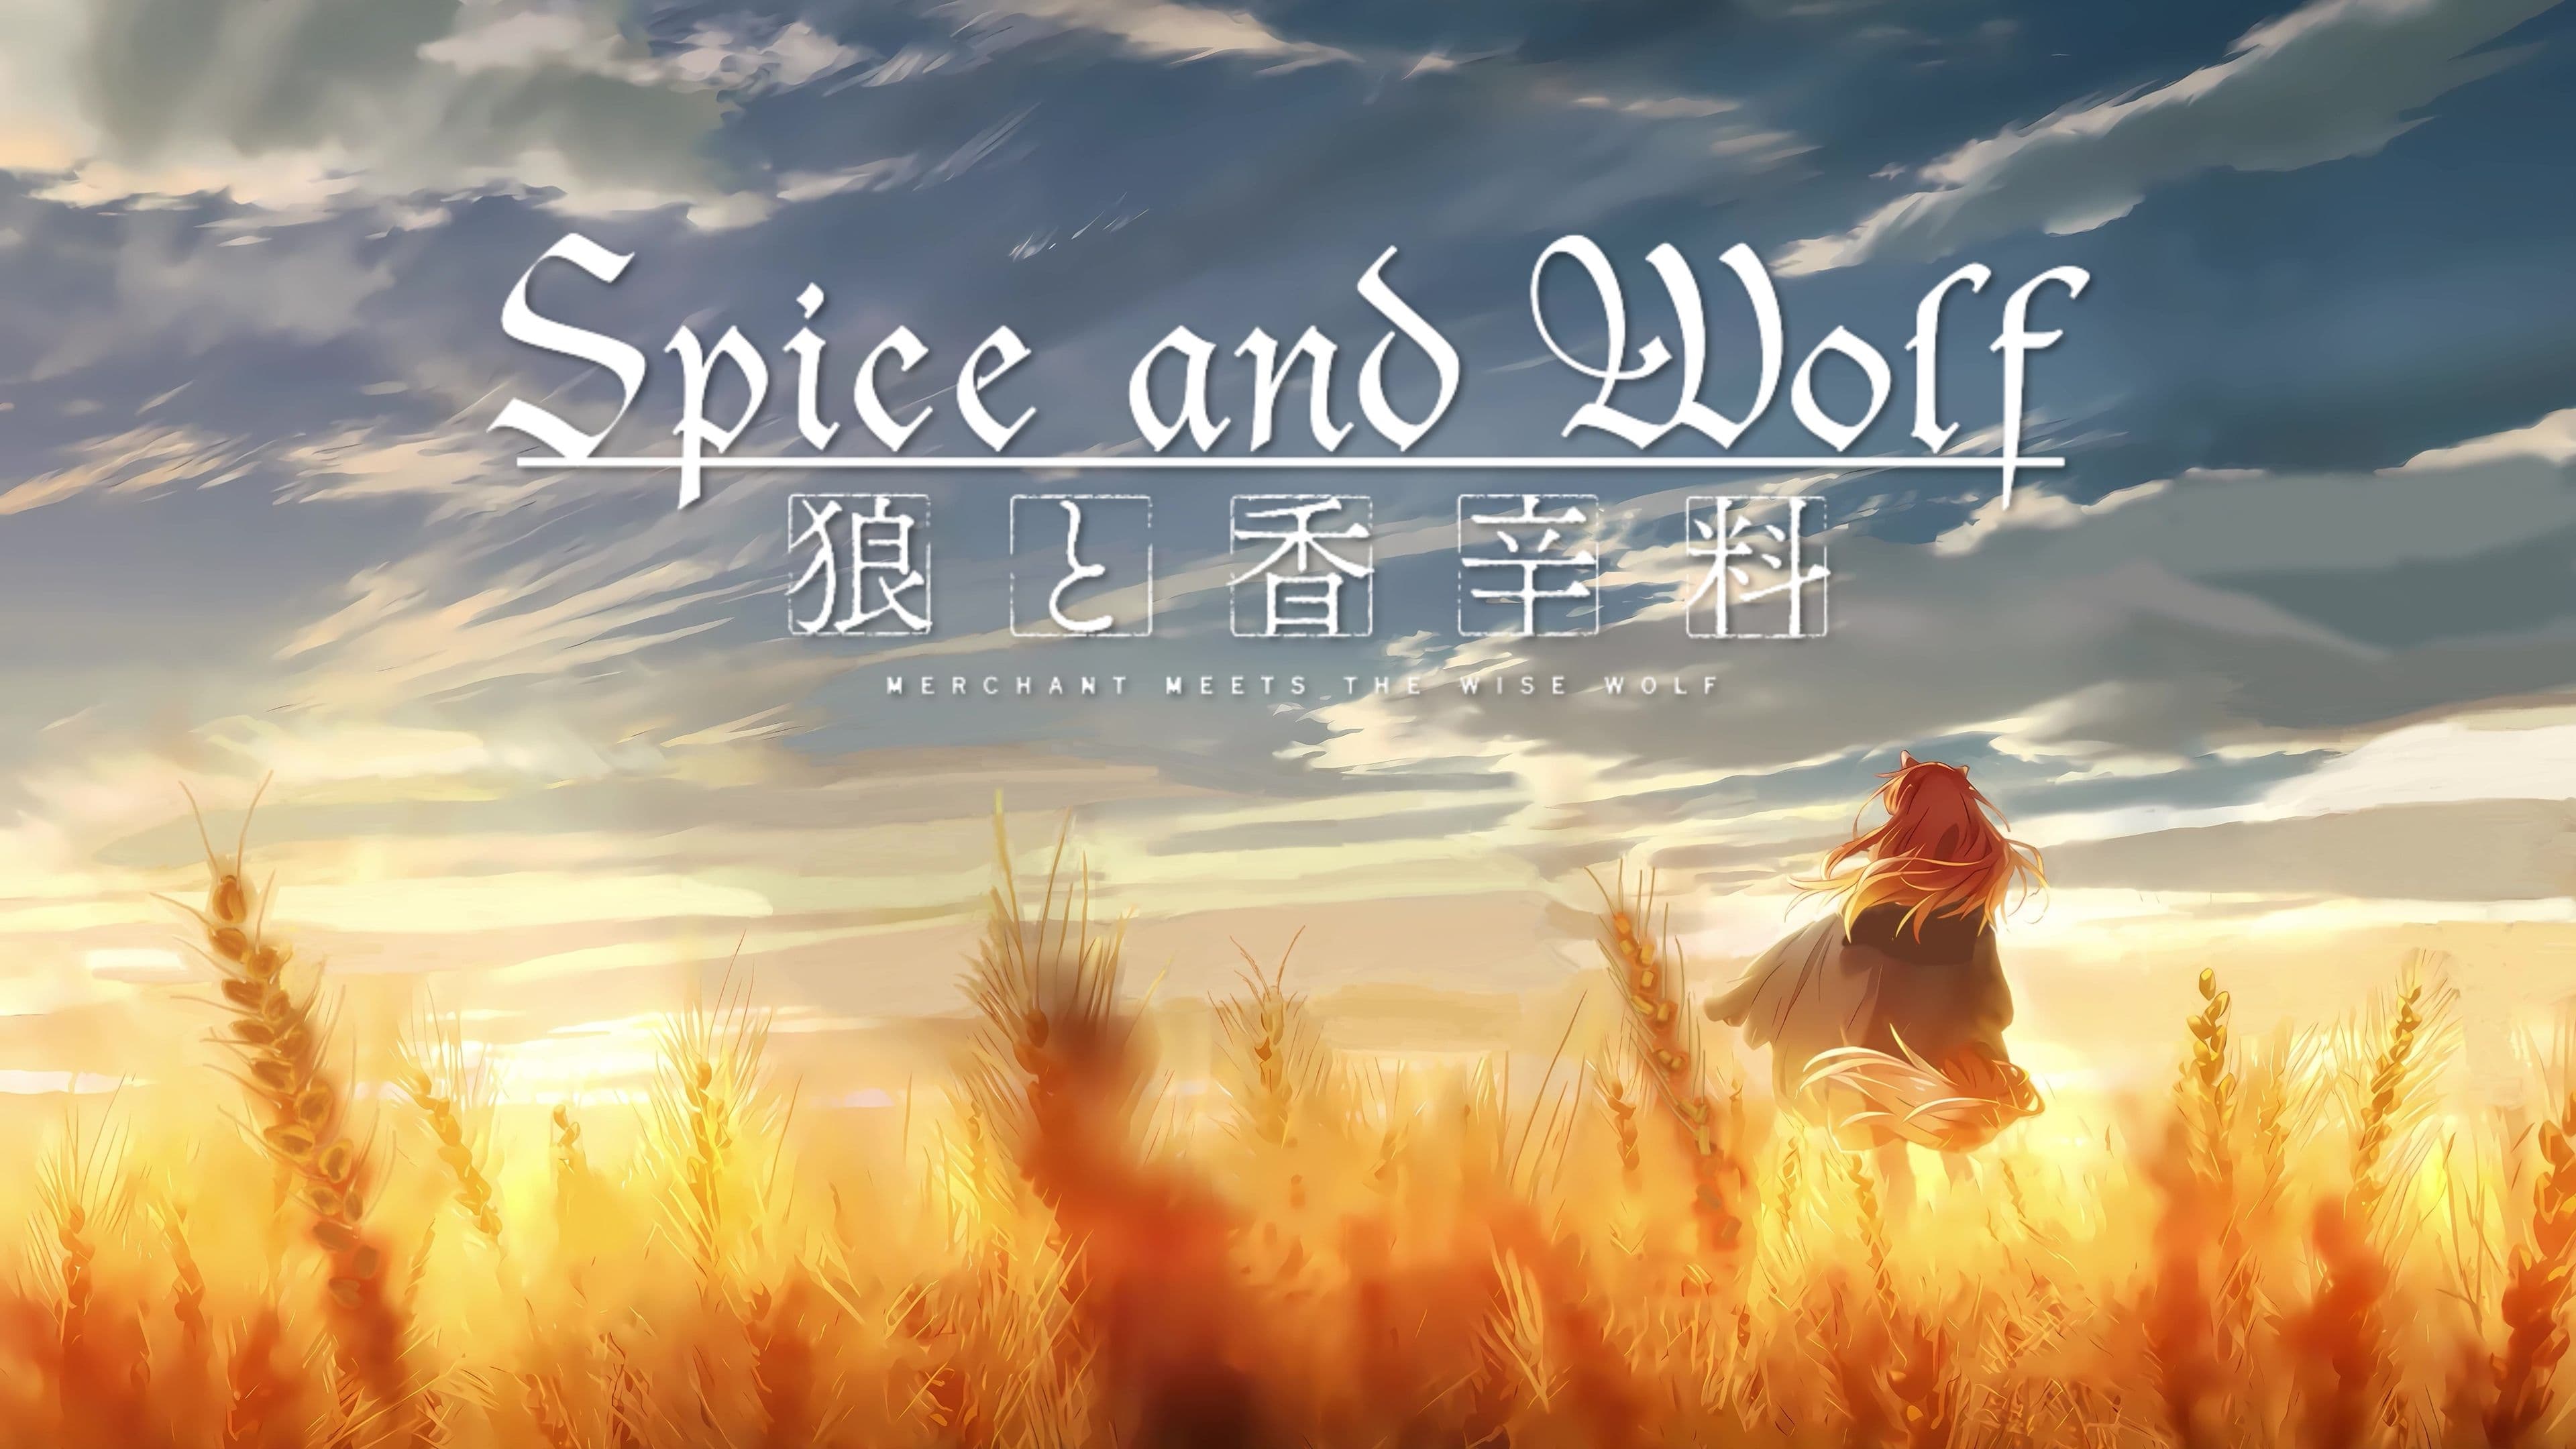 Spice and Wolf: MERCHANT MEETS THE WISE WOLF - Season 1 Episode 22